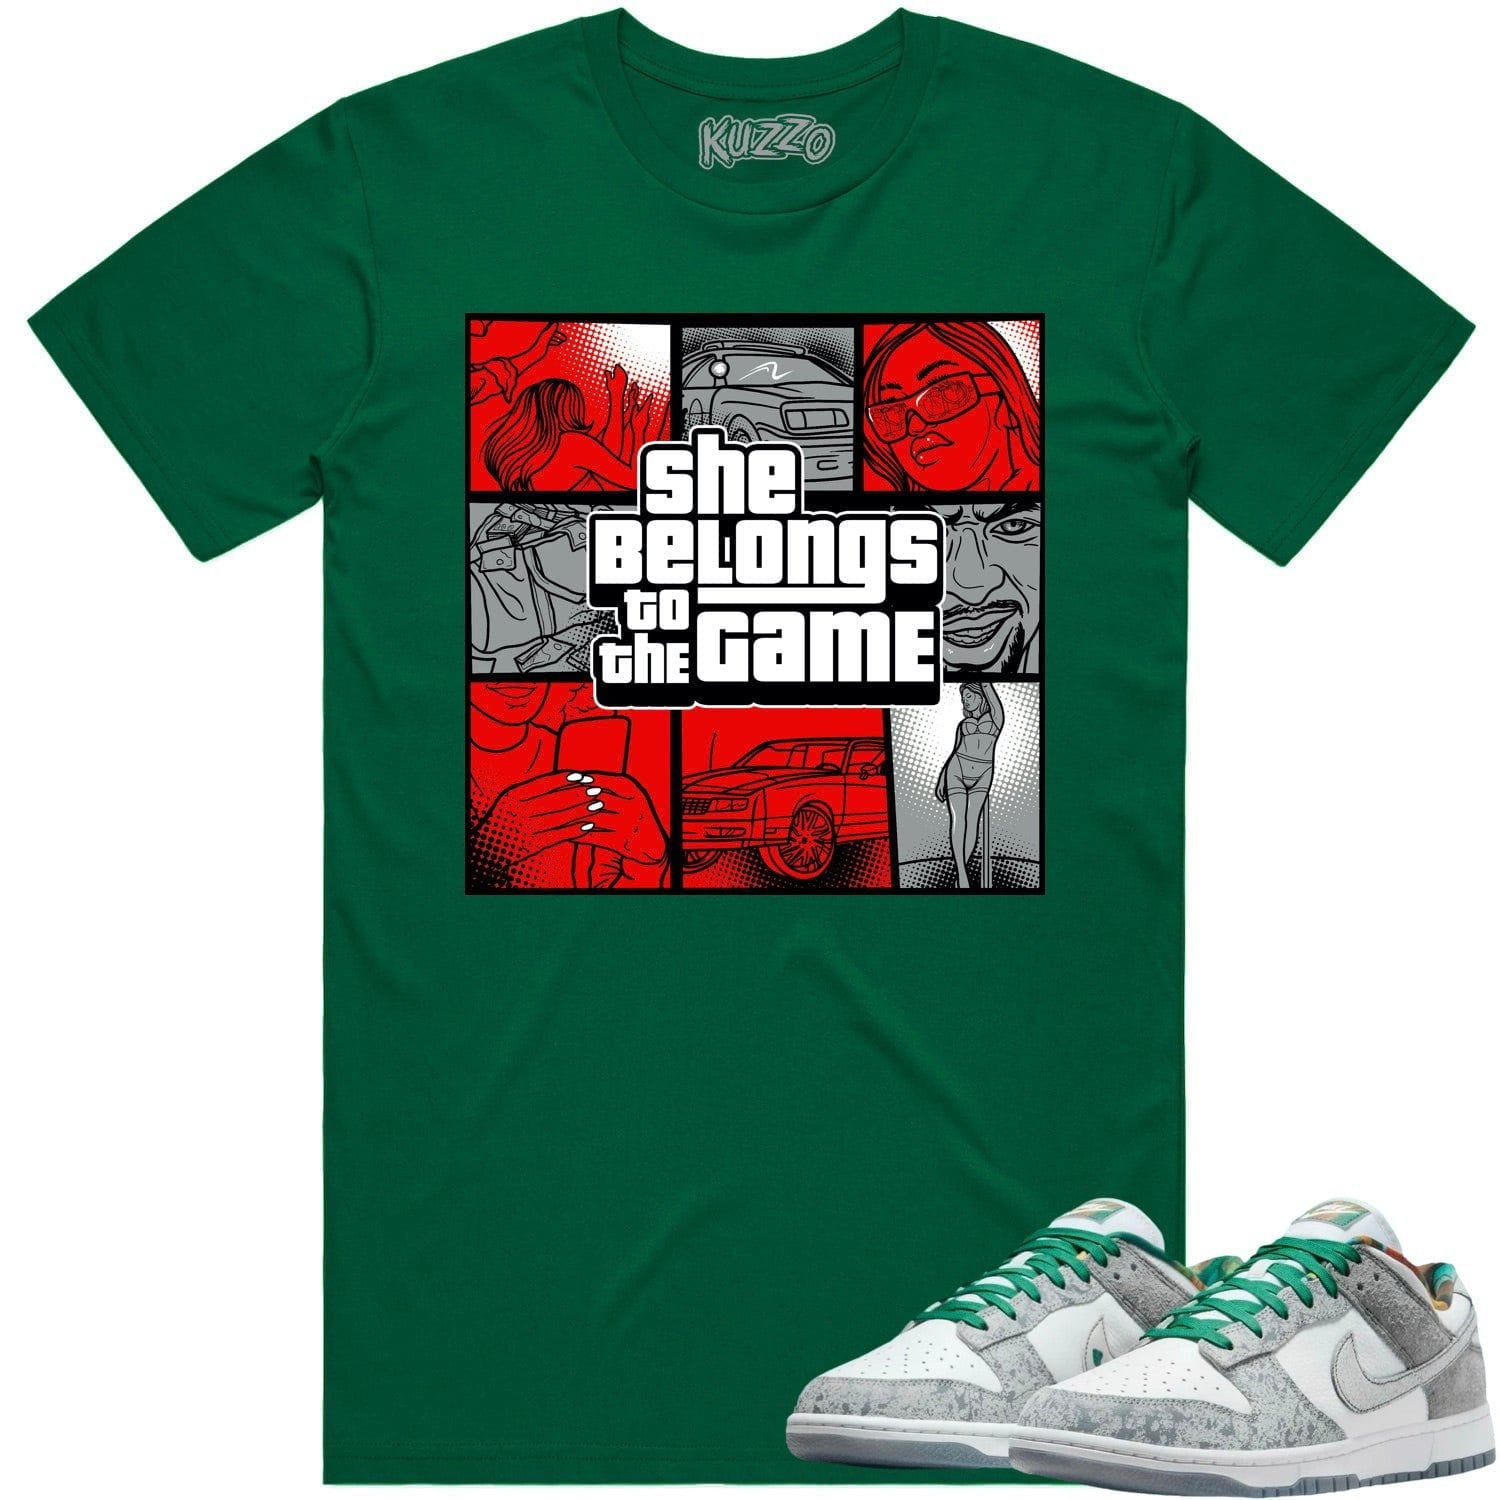 Philly Dunks Shirt - Dunks Sneaker Tees - Belongs to the Game